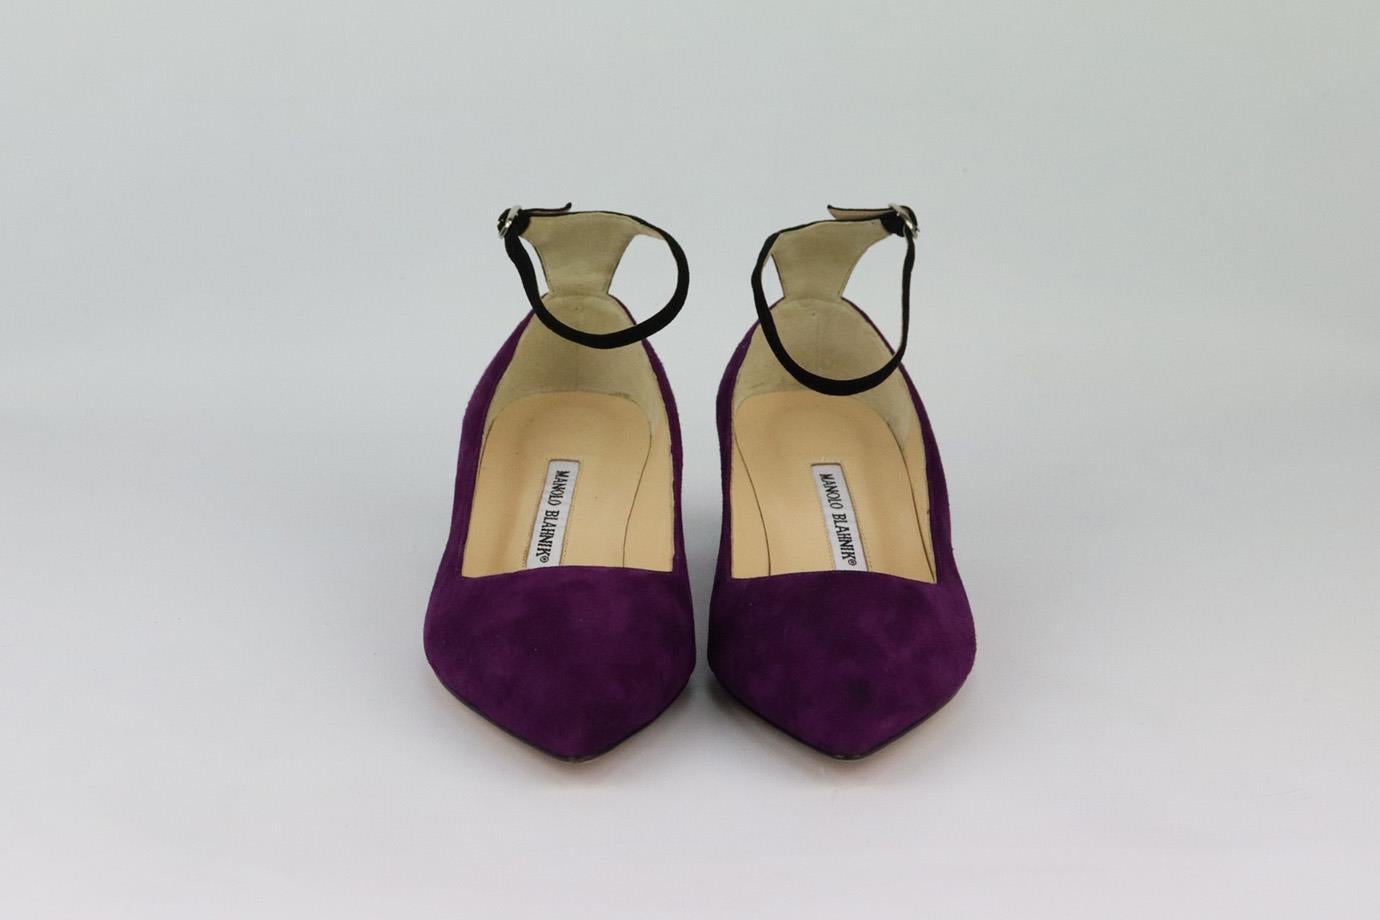 These pumps by Manolo Blahnik are a classic style that will never date, made in Italy from supple black and purple suede, they have pointed toes, ankle strap and comfortable 38 mm block heel to take you from morning meetings to dinner with friends.